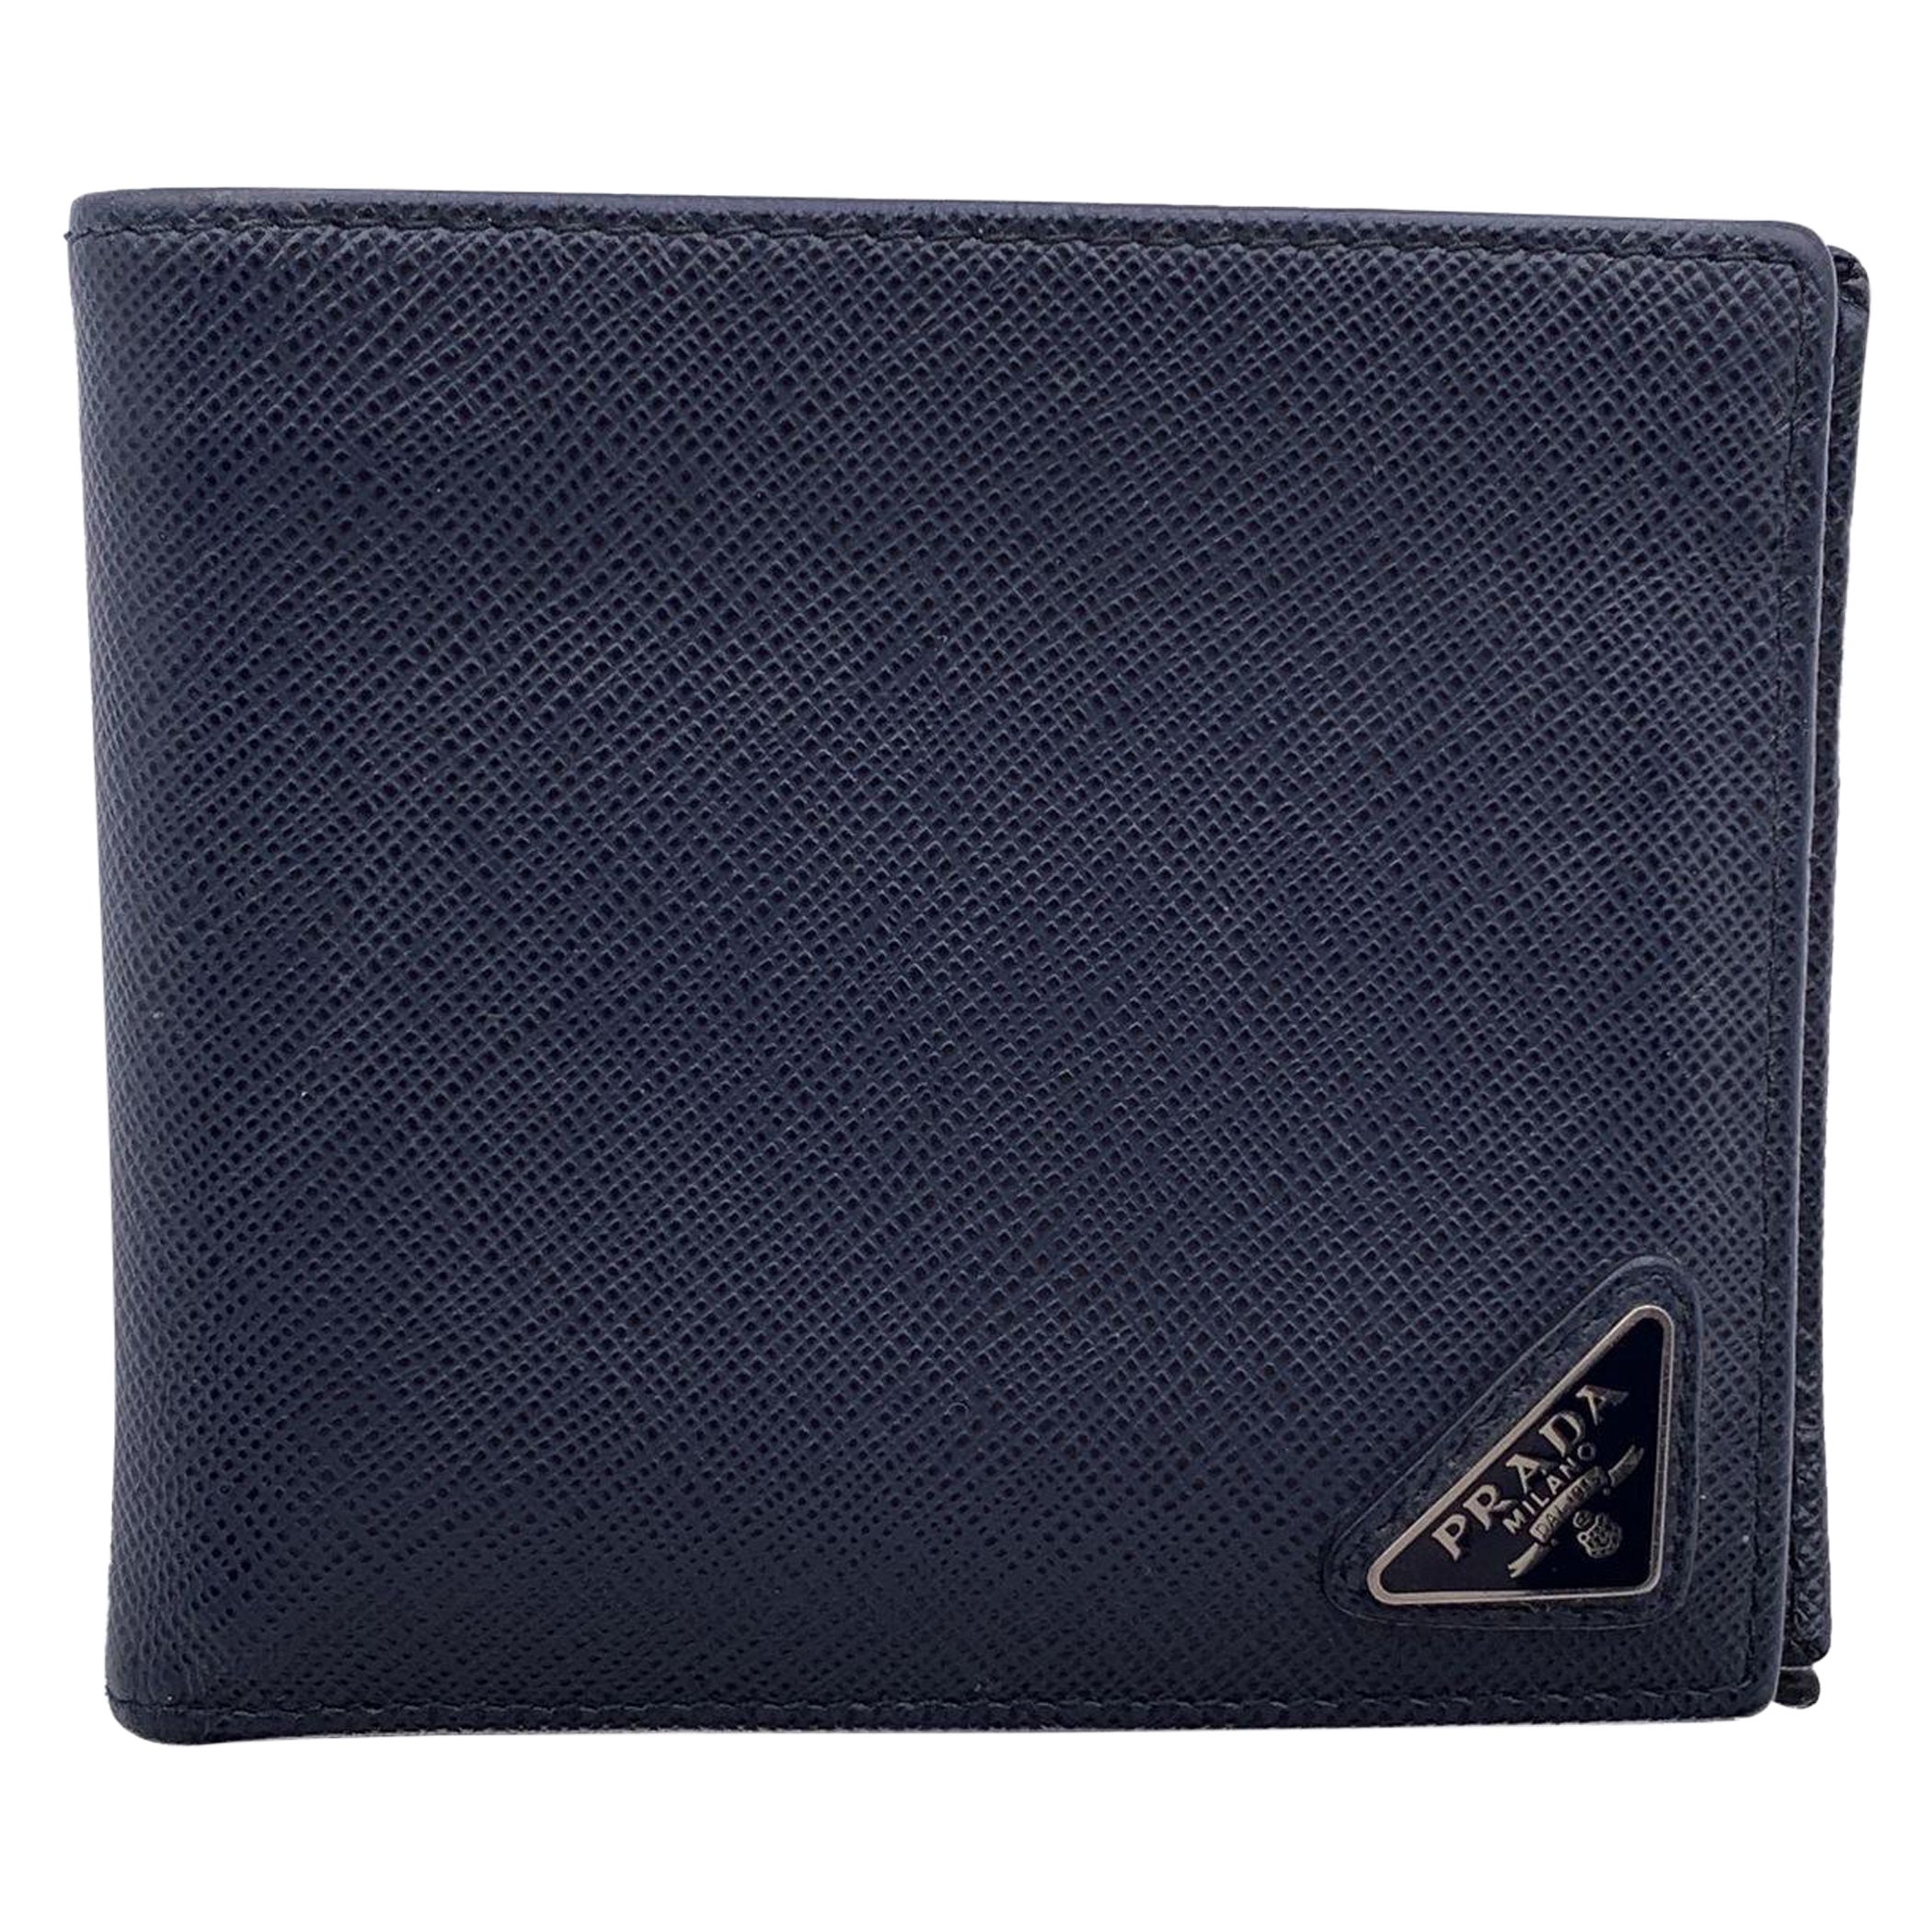 Prada Blue Saffiano Leather Bifold Wallet Coin Purse For Sale